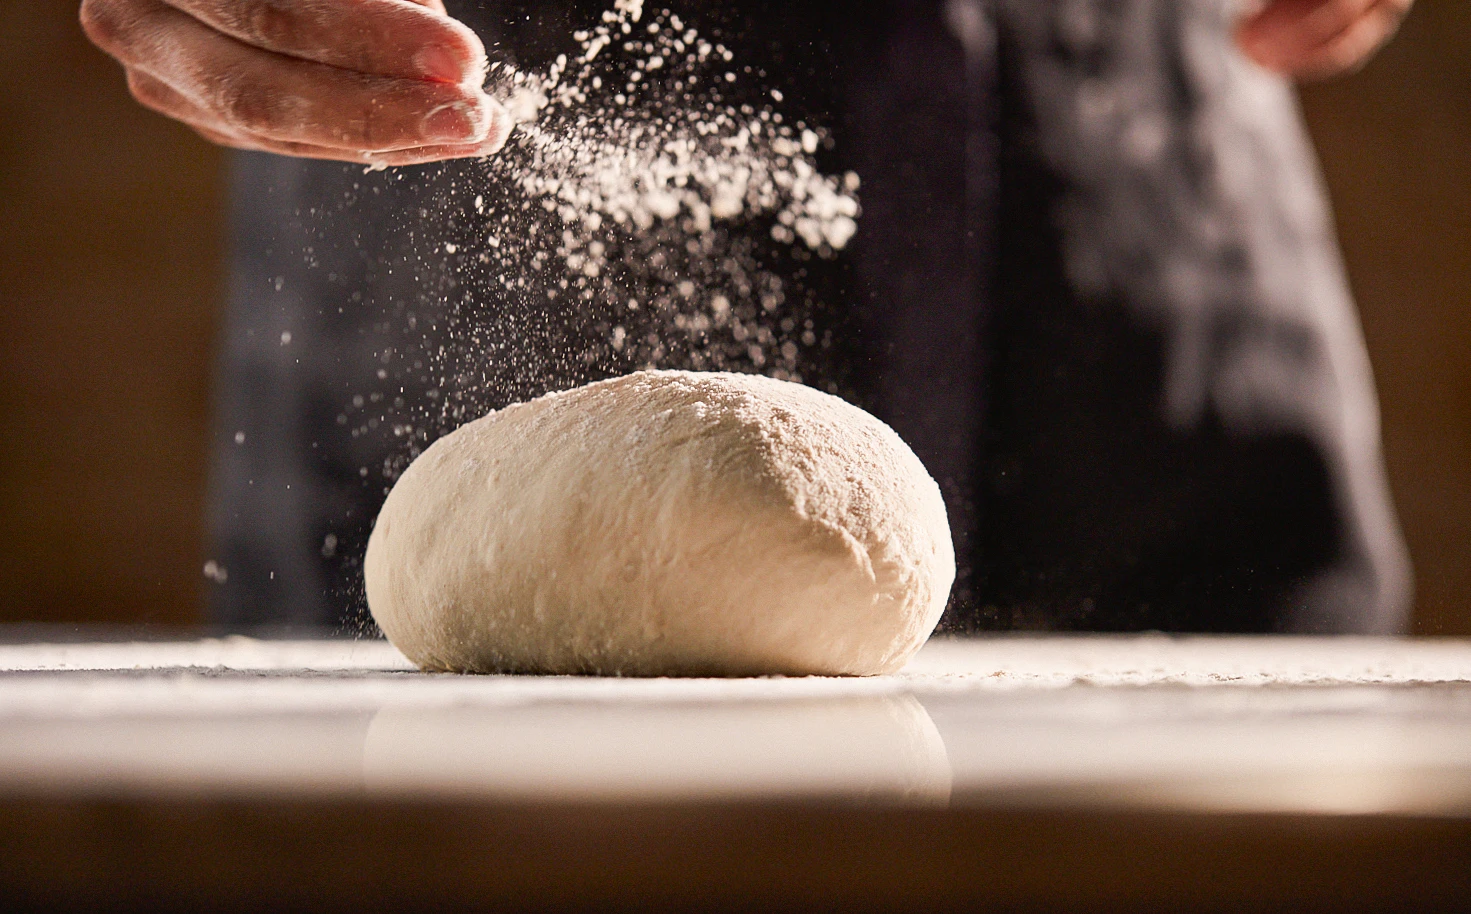 Flour is scattered over a ball of dough.